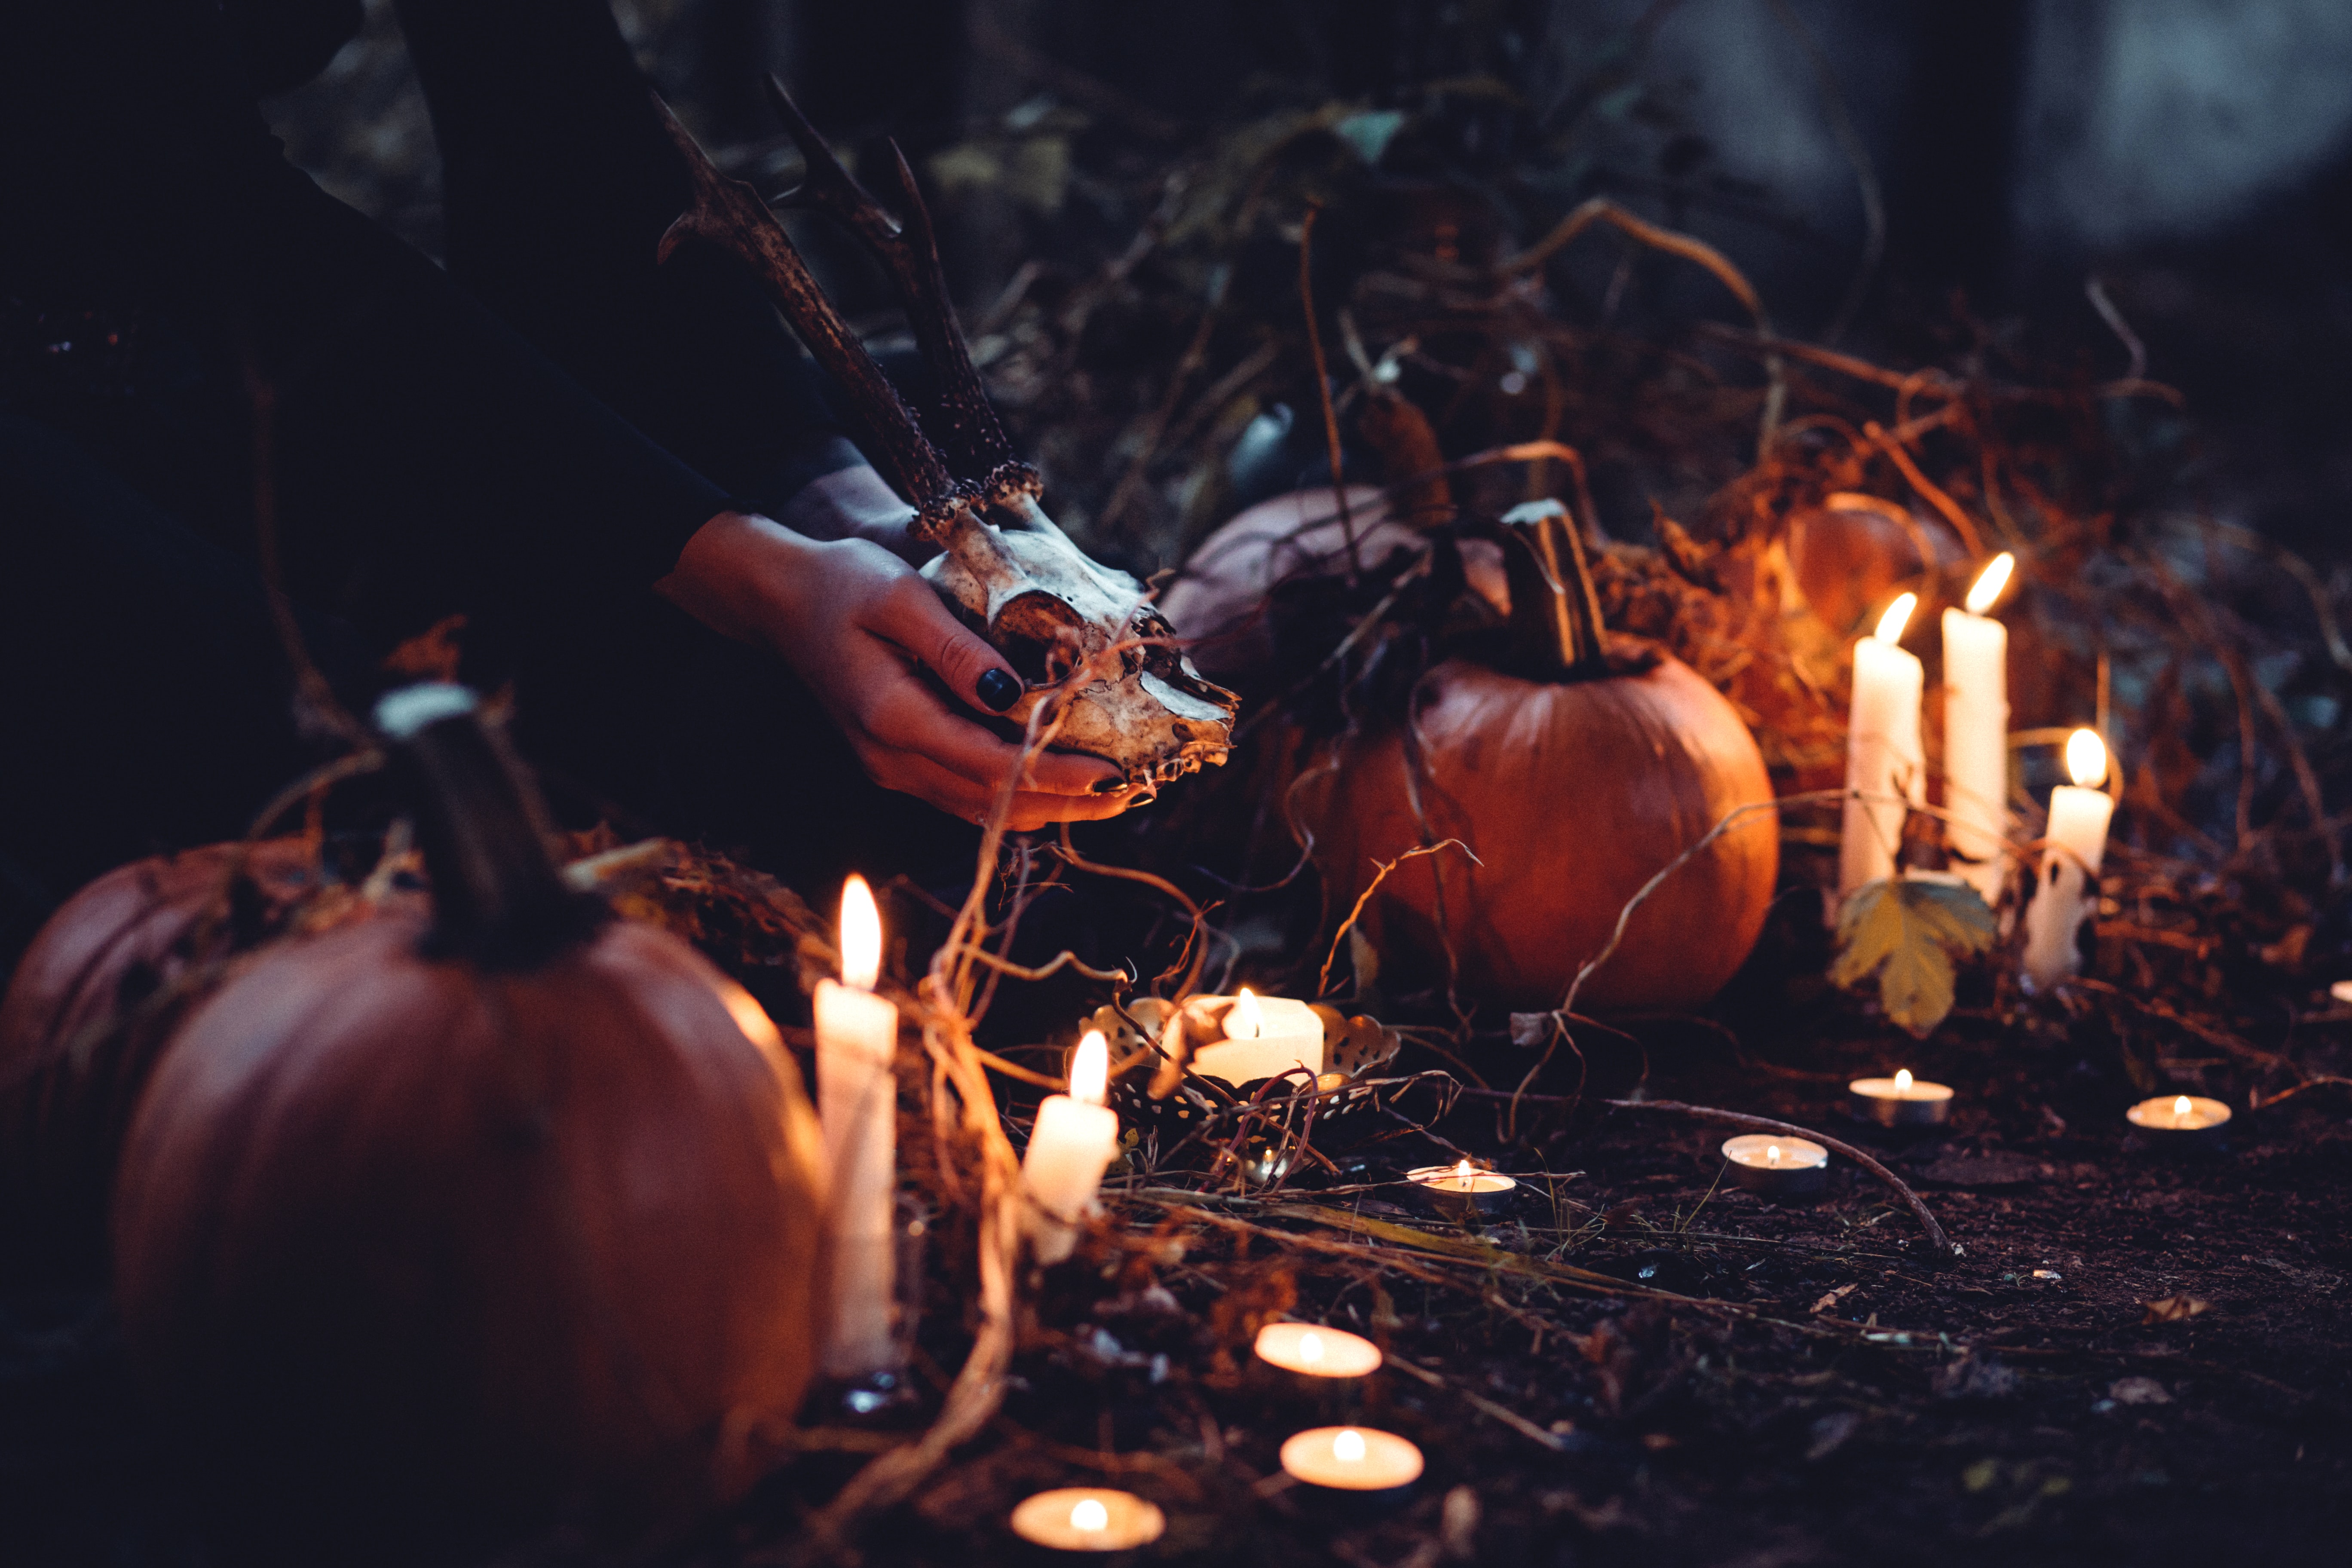 Paganism vs. Wicca vs. Witchcraft